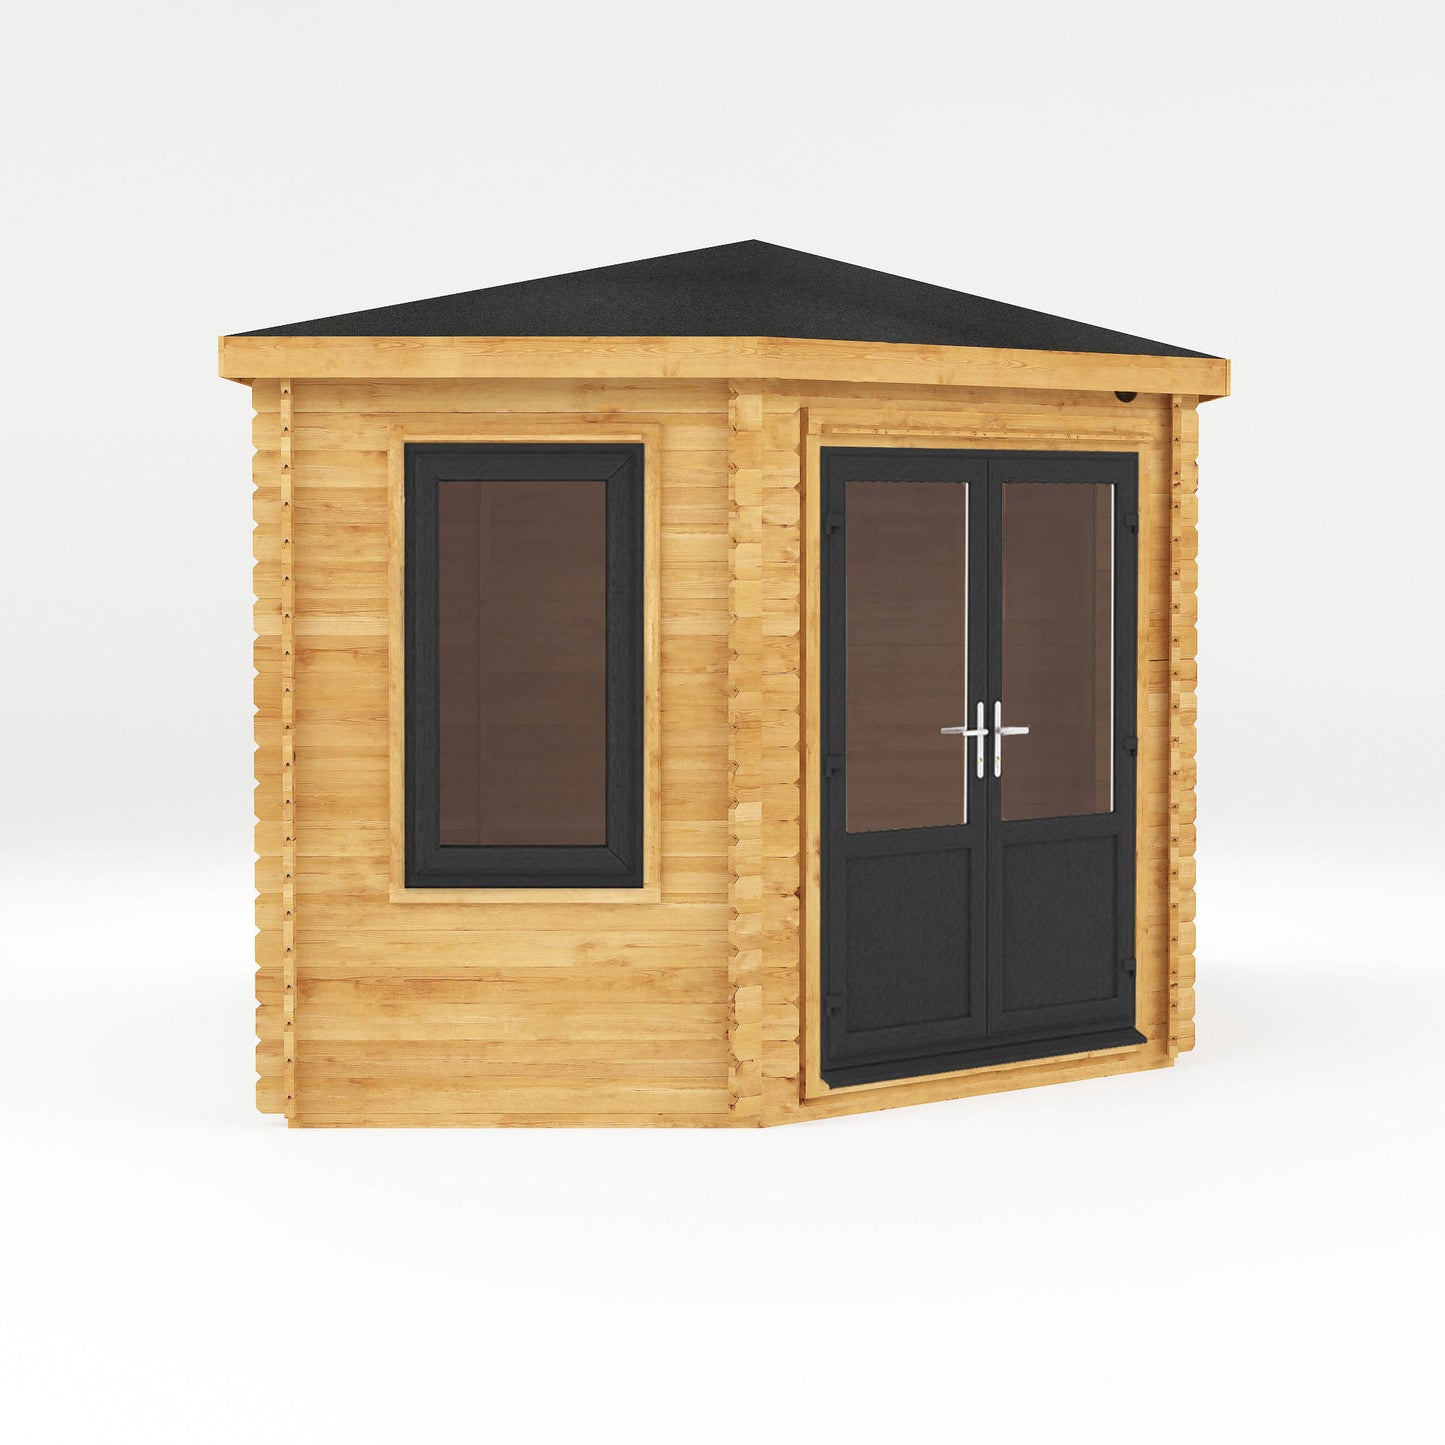 The Goldcrest 5m x 3m Log Cabin with Side Shed and Anthracite UPVC